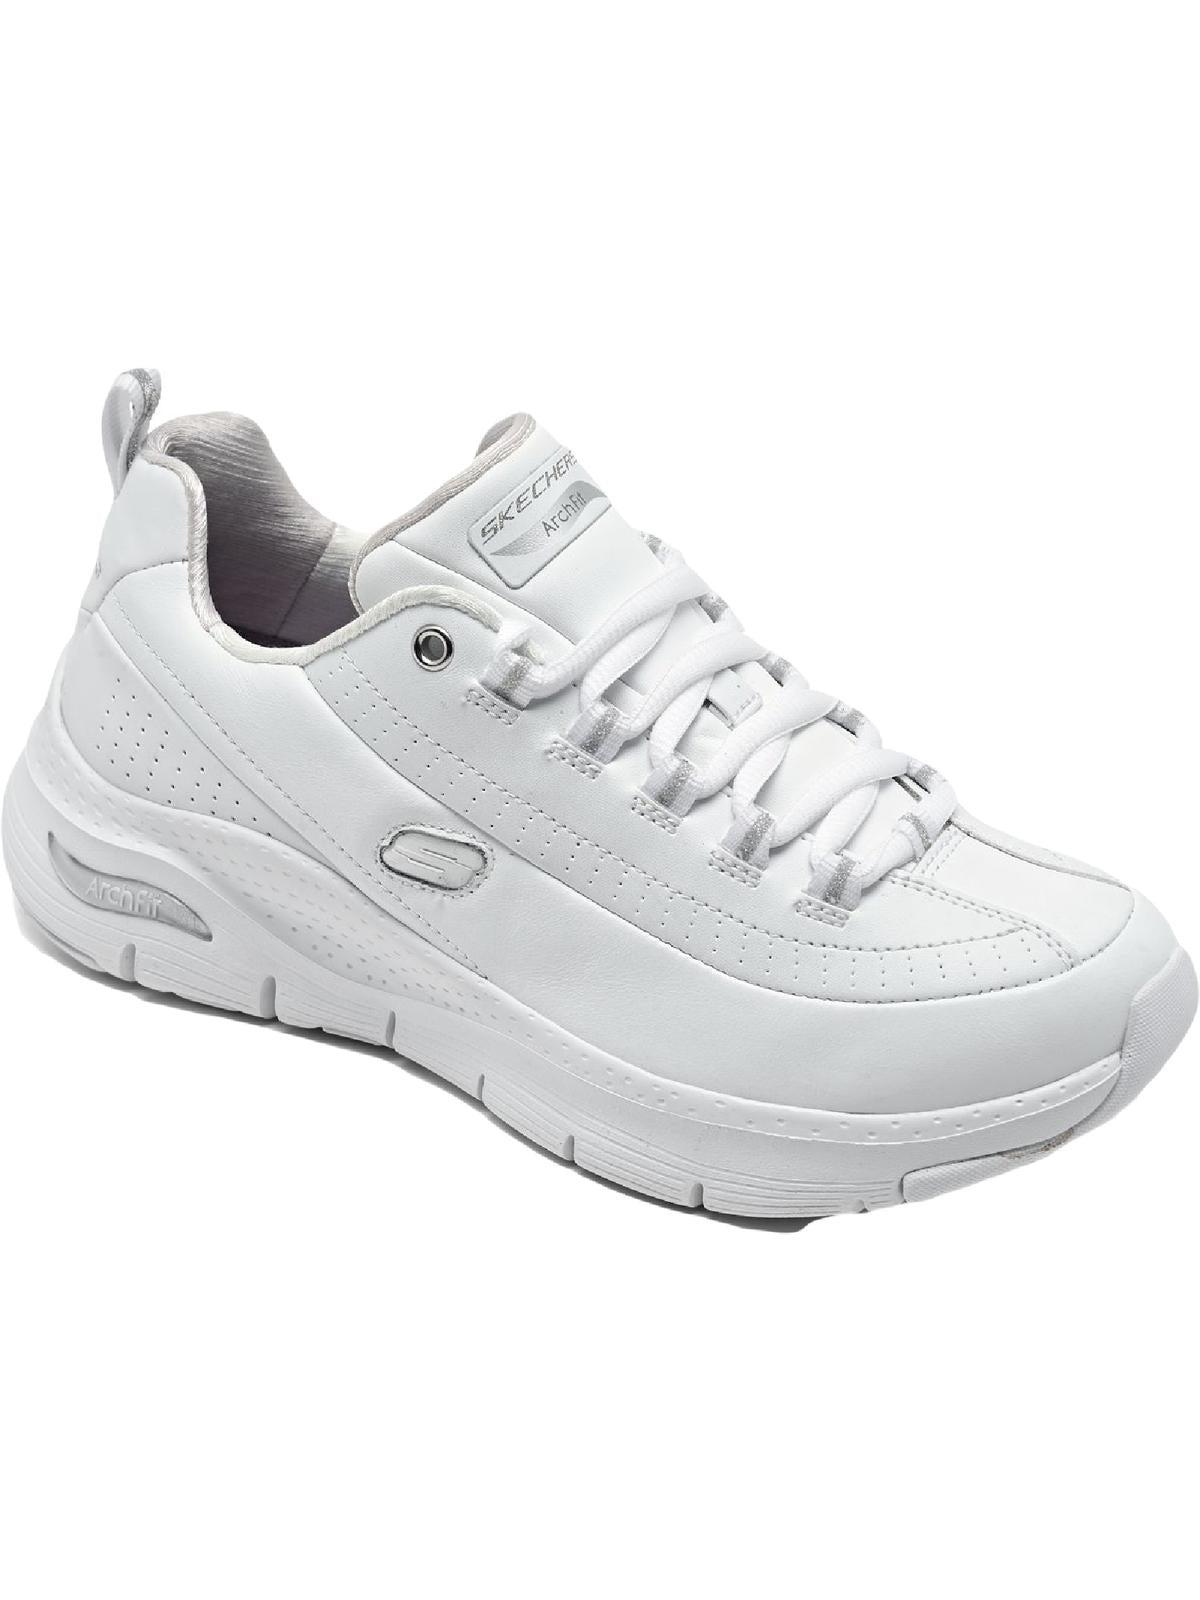 Skechers Arch Fit-citi Drive Leather Workout Athletic And Training ...